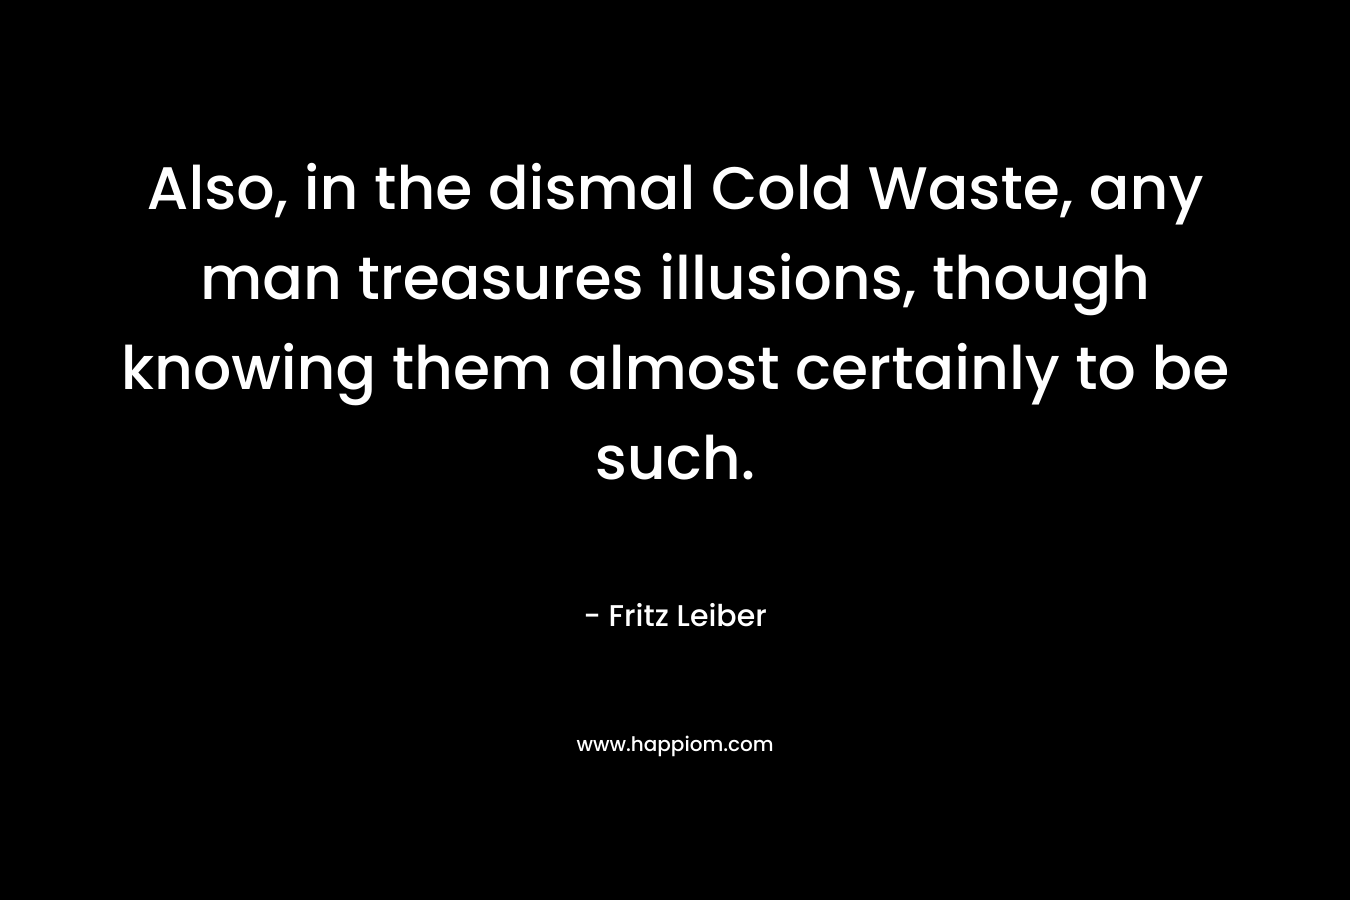 Also, in the dismal Cold Waste, any man treasures illusions, though knowing them almost certainly to be such.